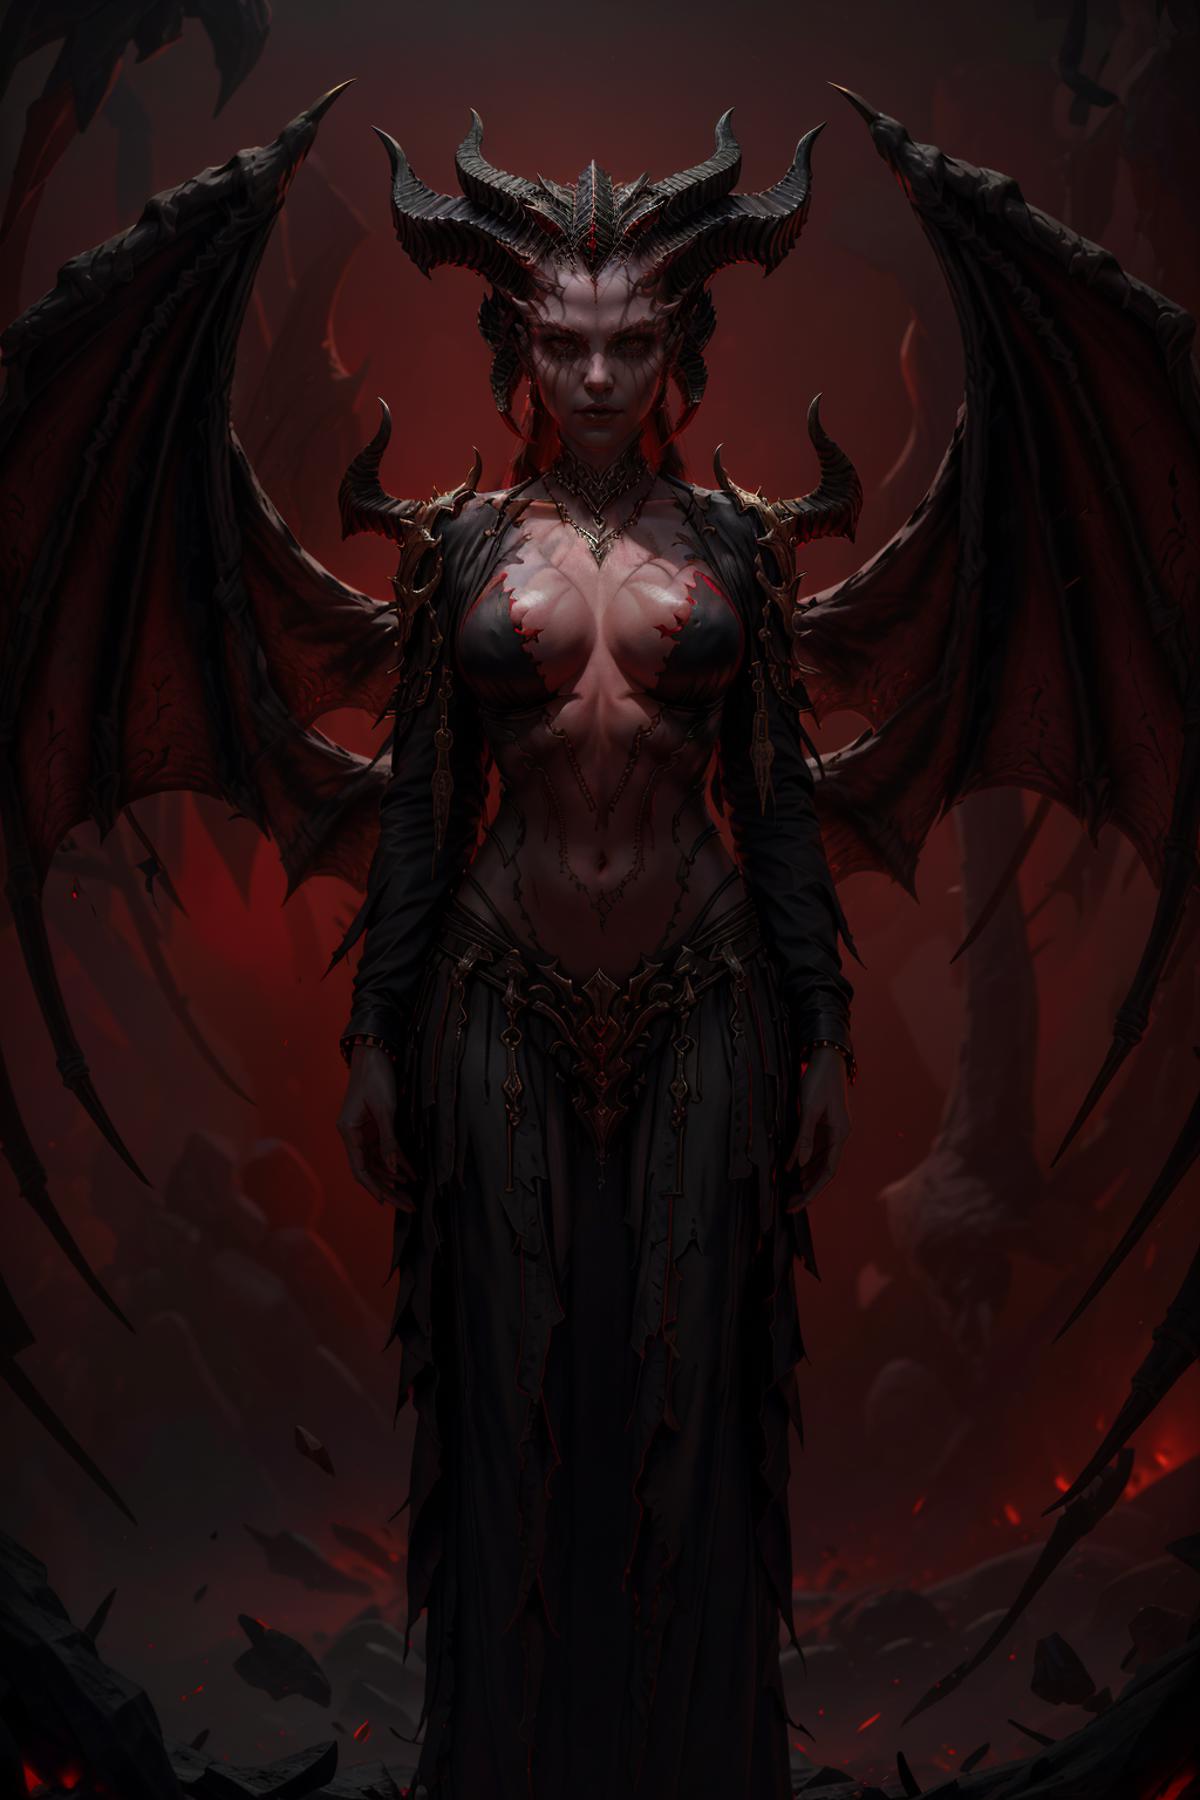 Lilith from Diablo IV image by BloodRedKittie